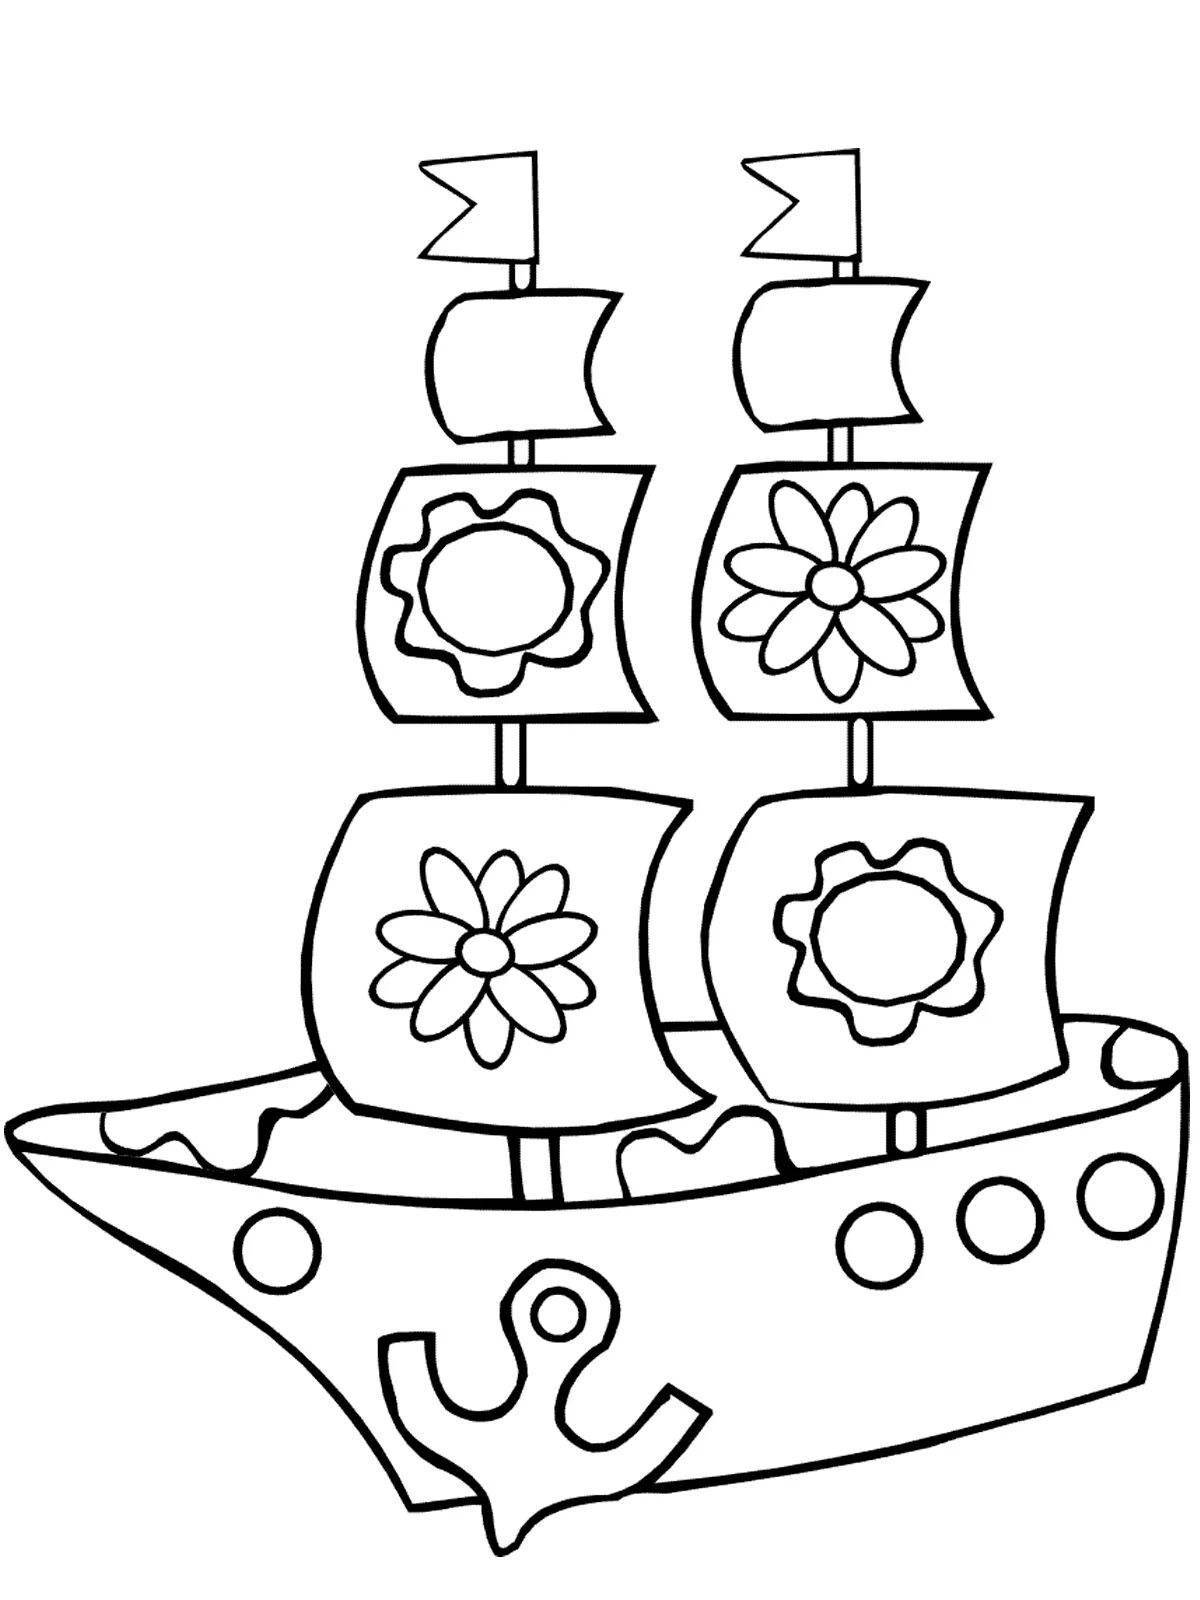 Fun ship coloring page for kids